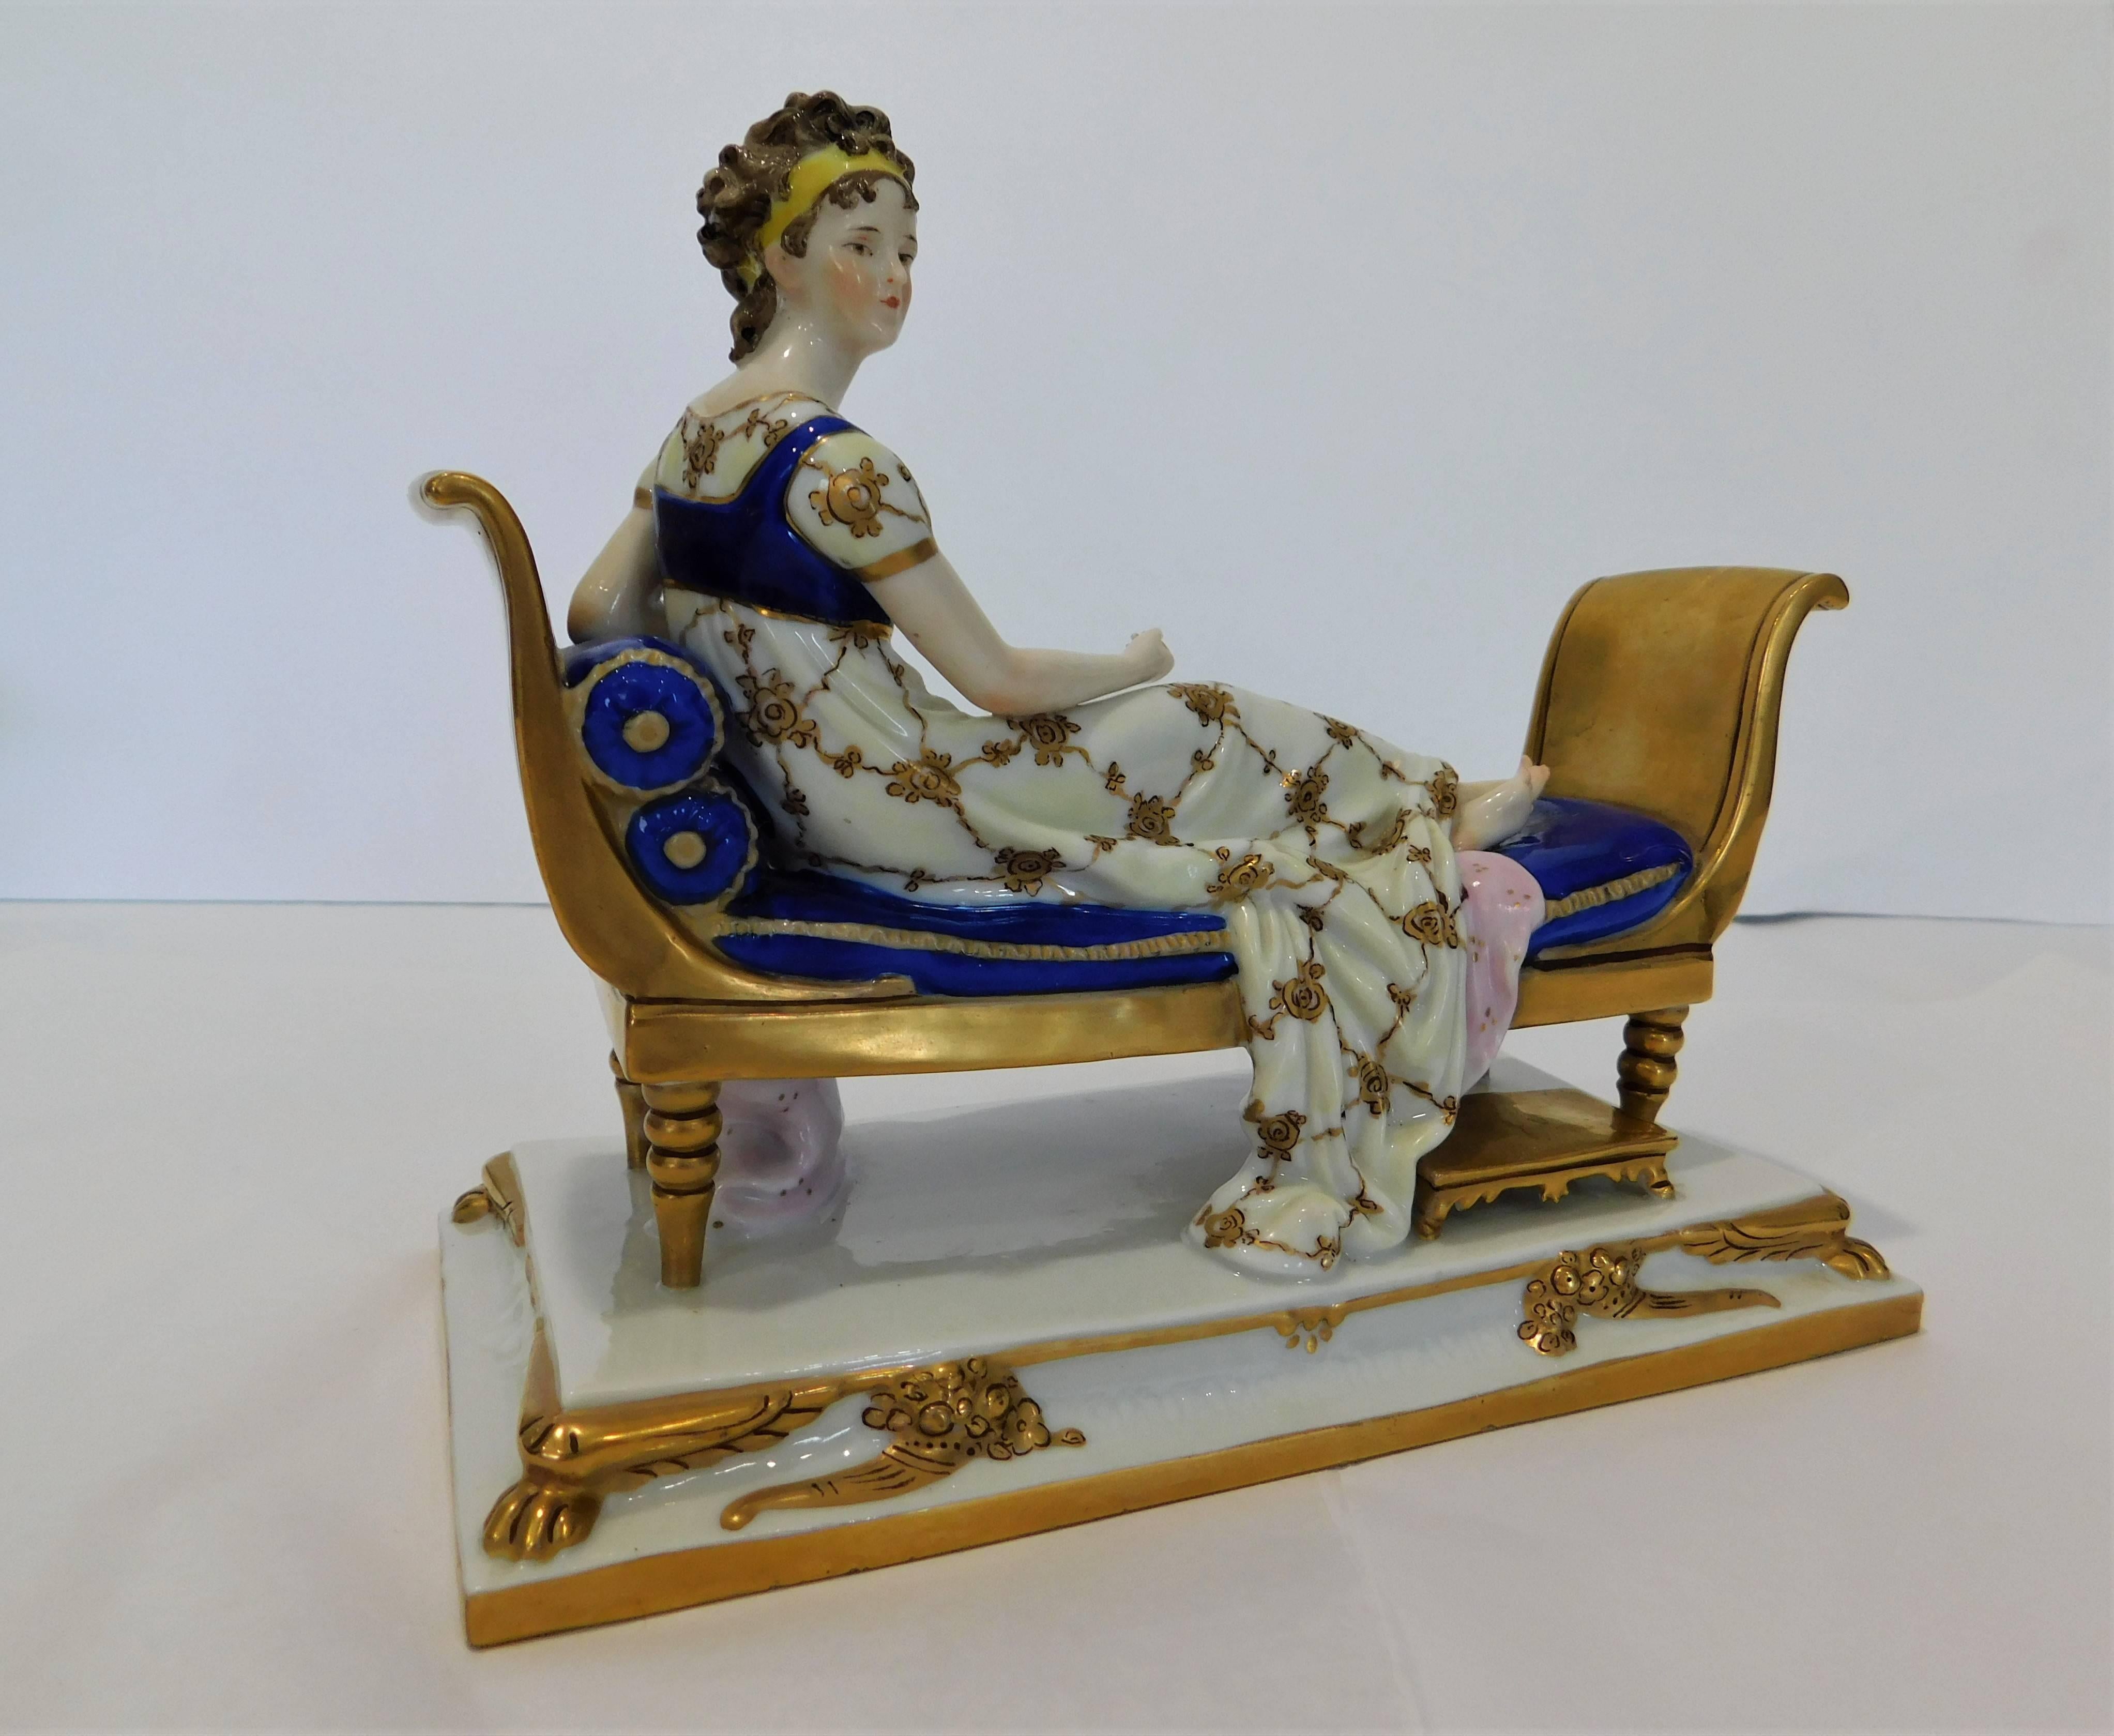 Scheibe Alsbach vintage porcelain figurine of Madame Recamier made in Germany, hand-painted.
    